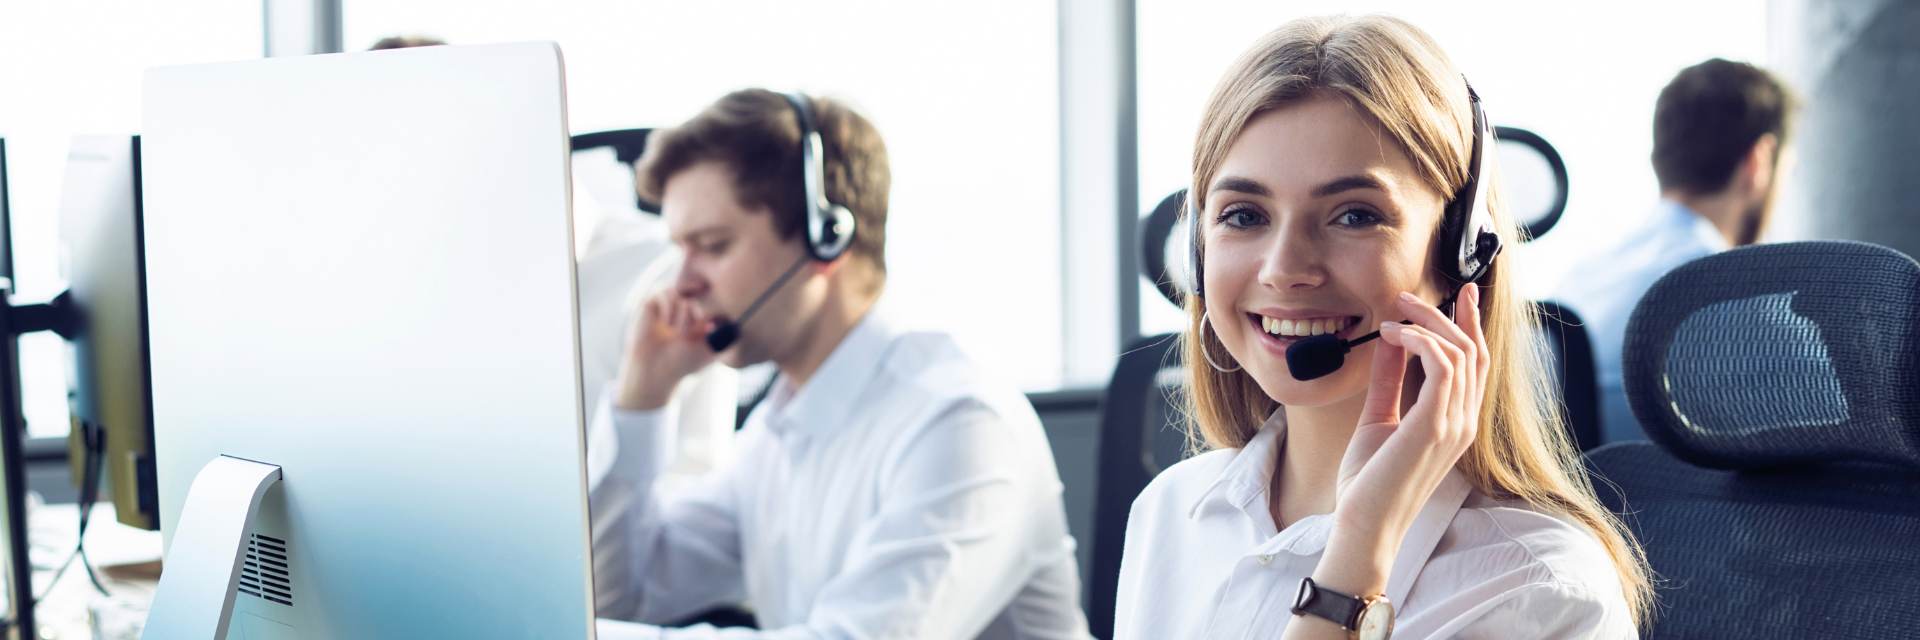 woman smiling on a call using a headset